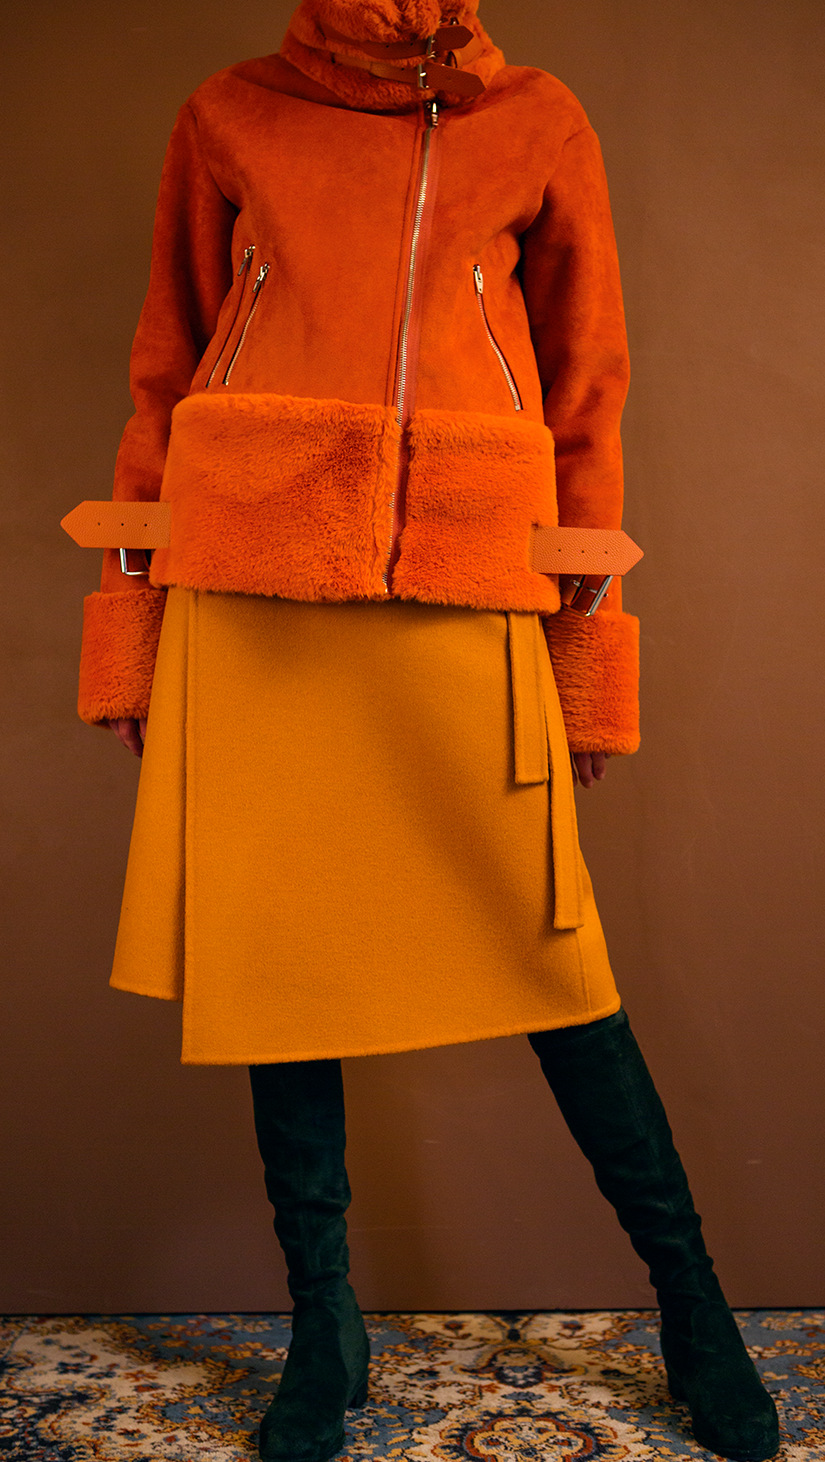 Moto-style suede shearling jacket fully lined in orange shearling. Super soft in suede, dropped shoulder, extra long sleeves with soft shearling detail at cuffs, front zip pockets, gusseted back panel, belt at waist with bucket closure, zip closure with attached wide belt in belt loops, Medium-weight. Fully lined. Oversized. Relaxed silhouette.